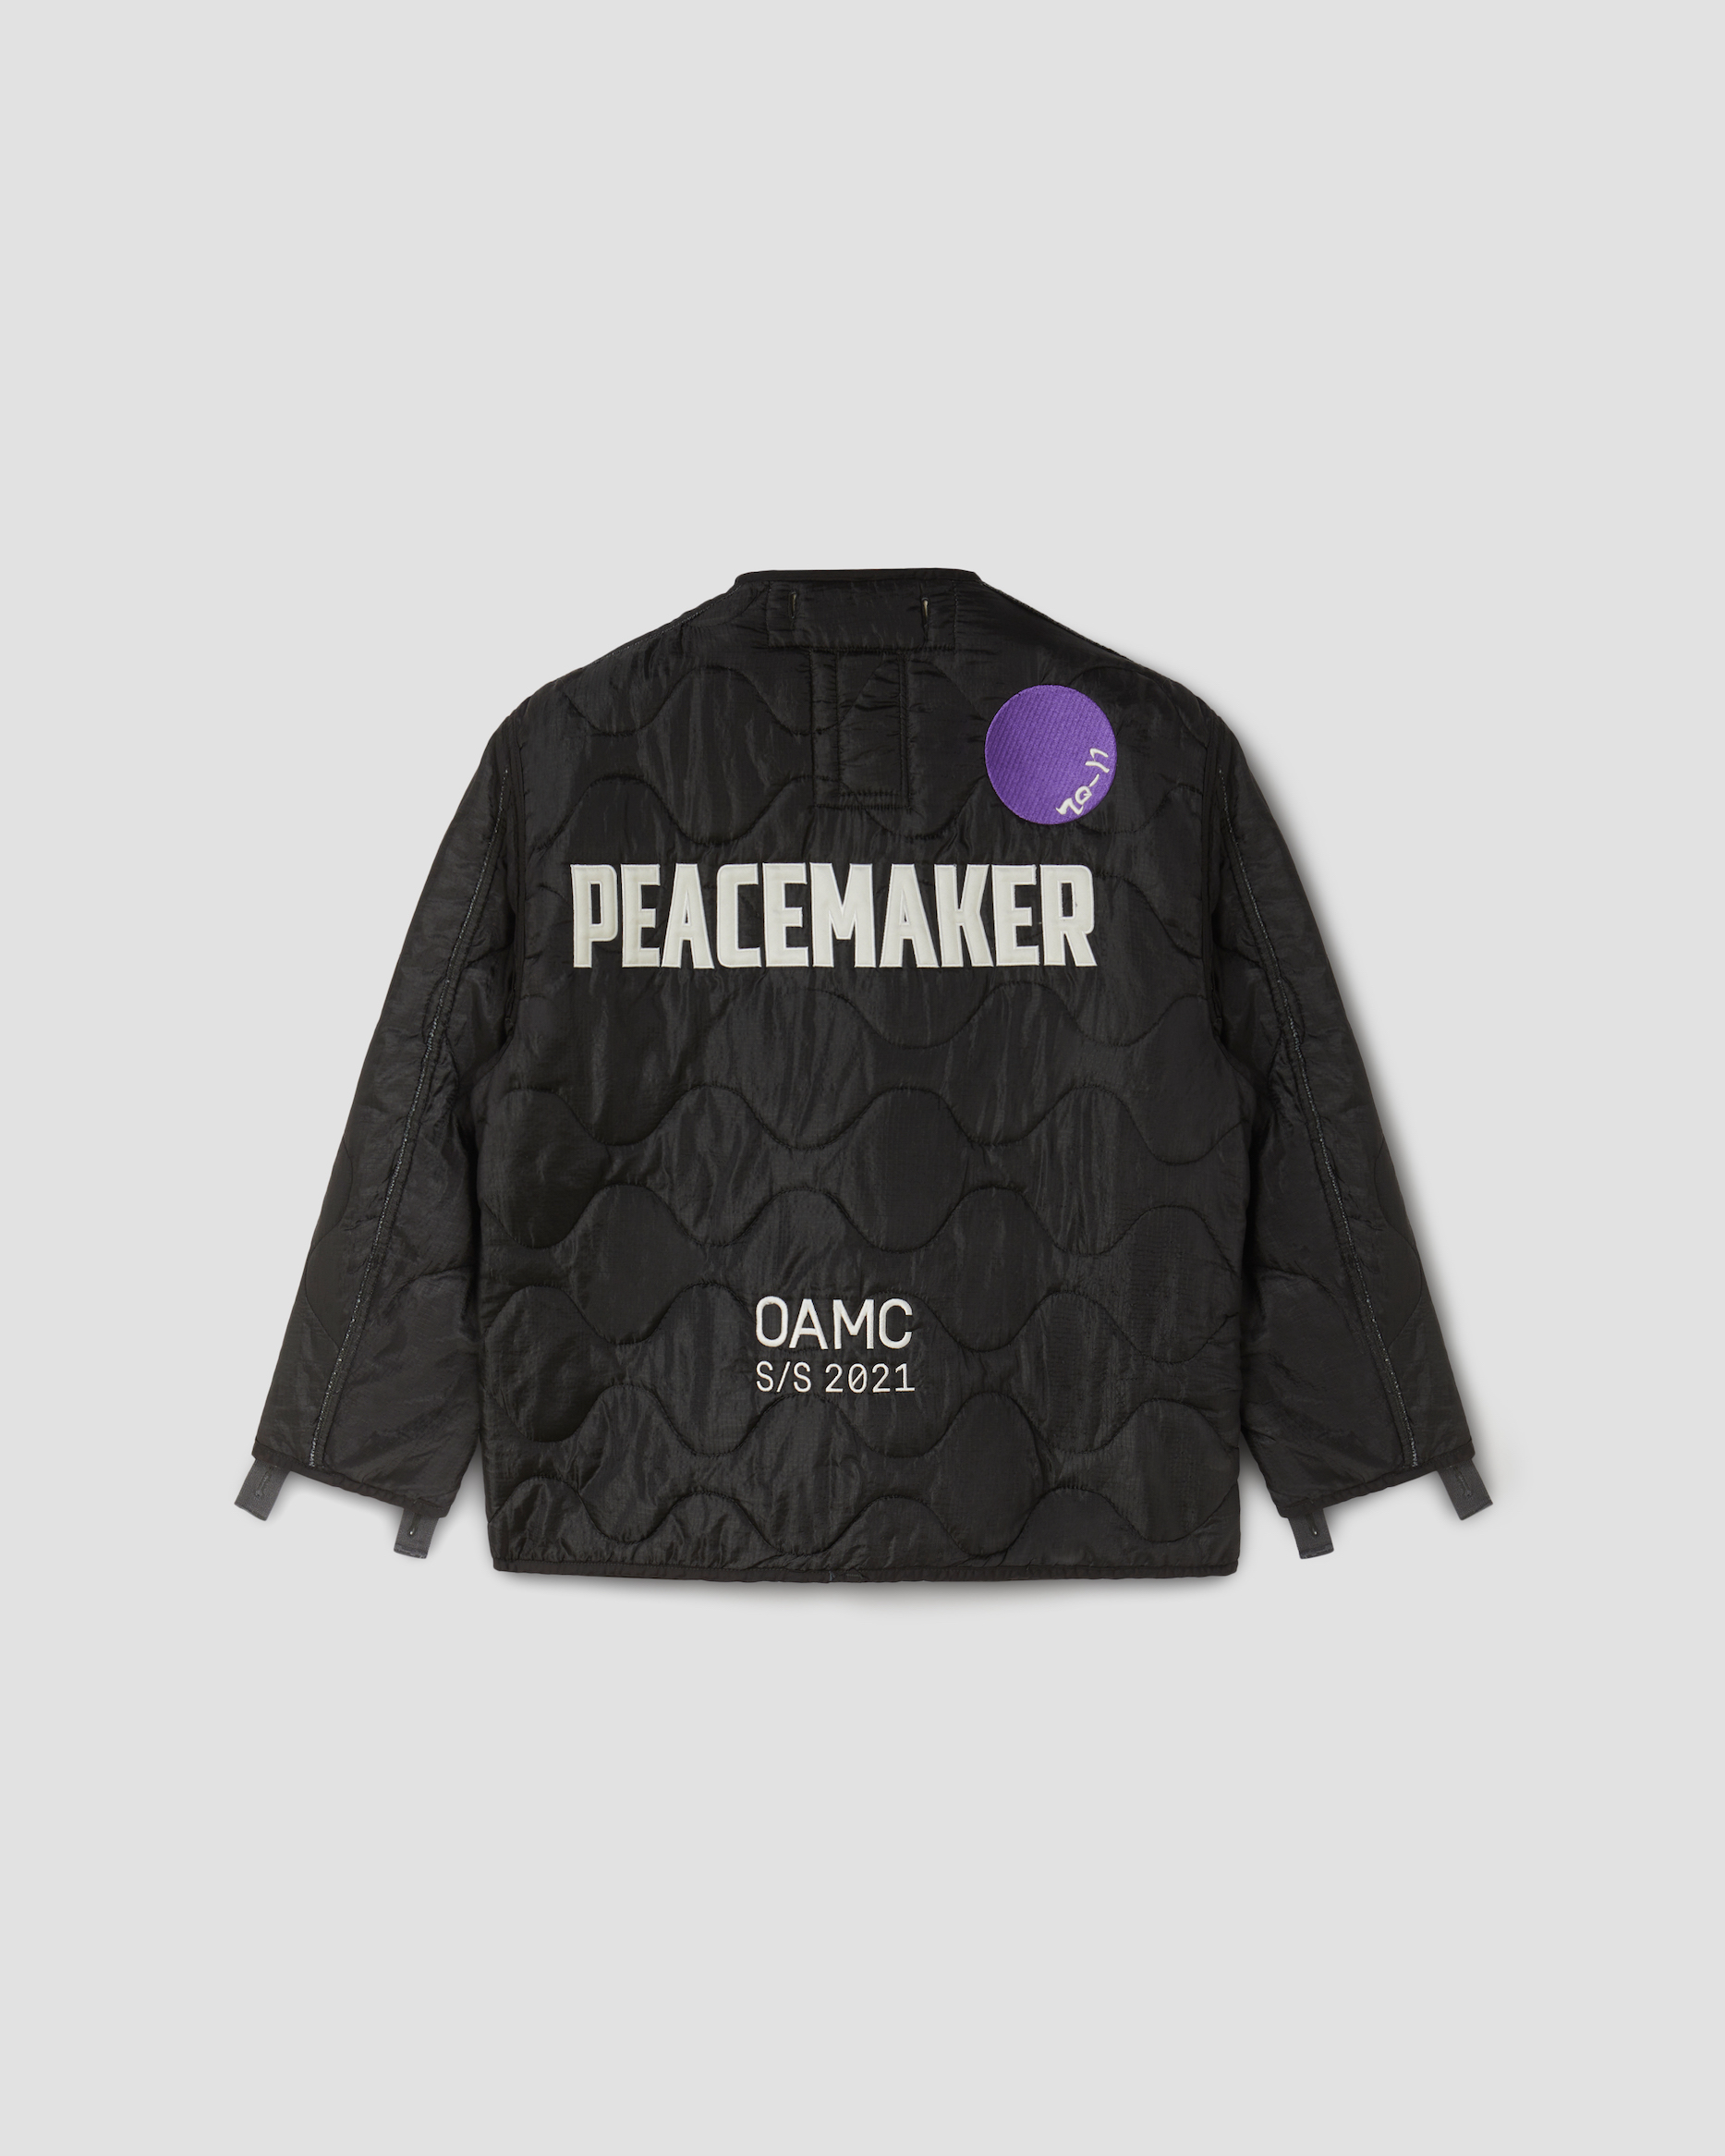 oamc TACKLE TWILL PEACEMAKER LINER | www.innoveering.net